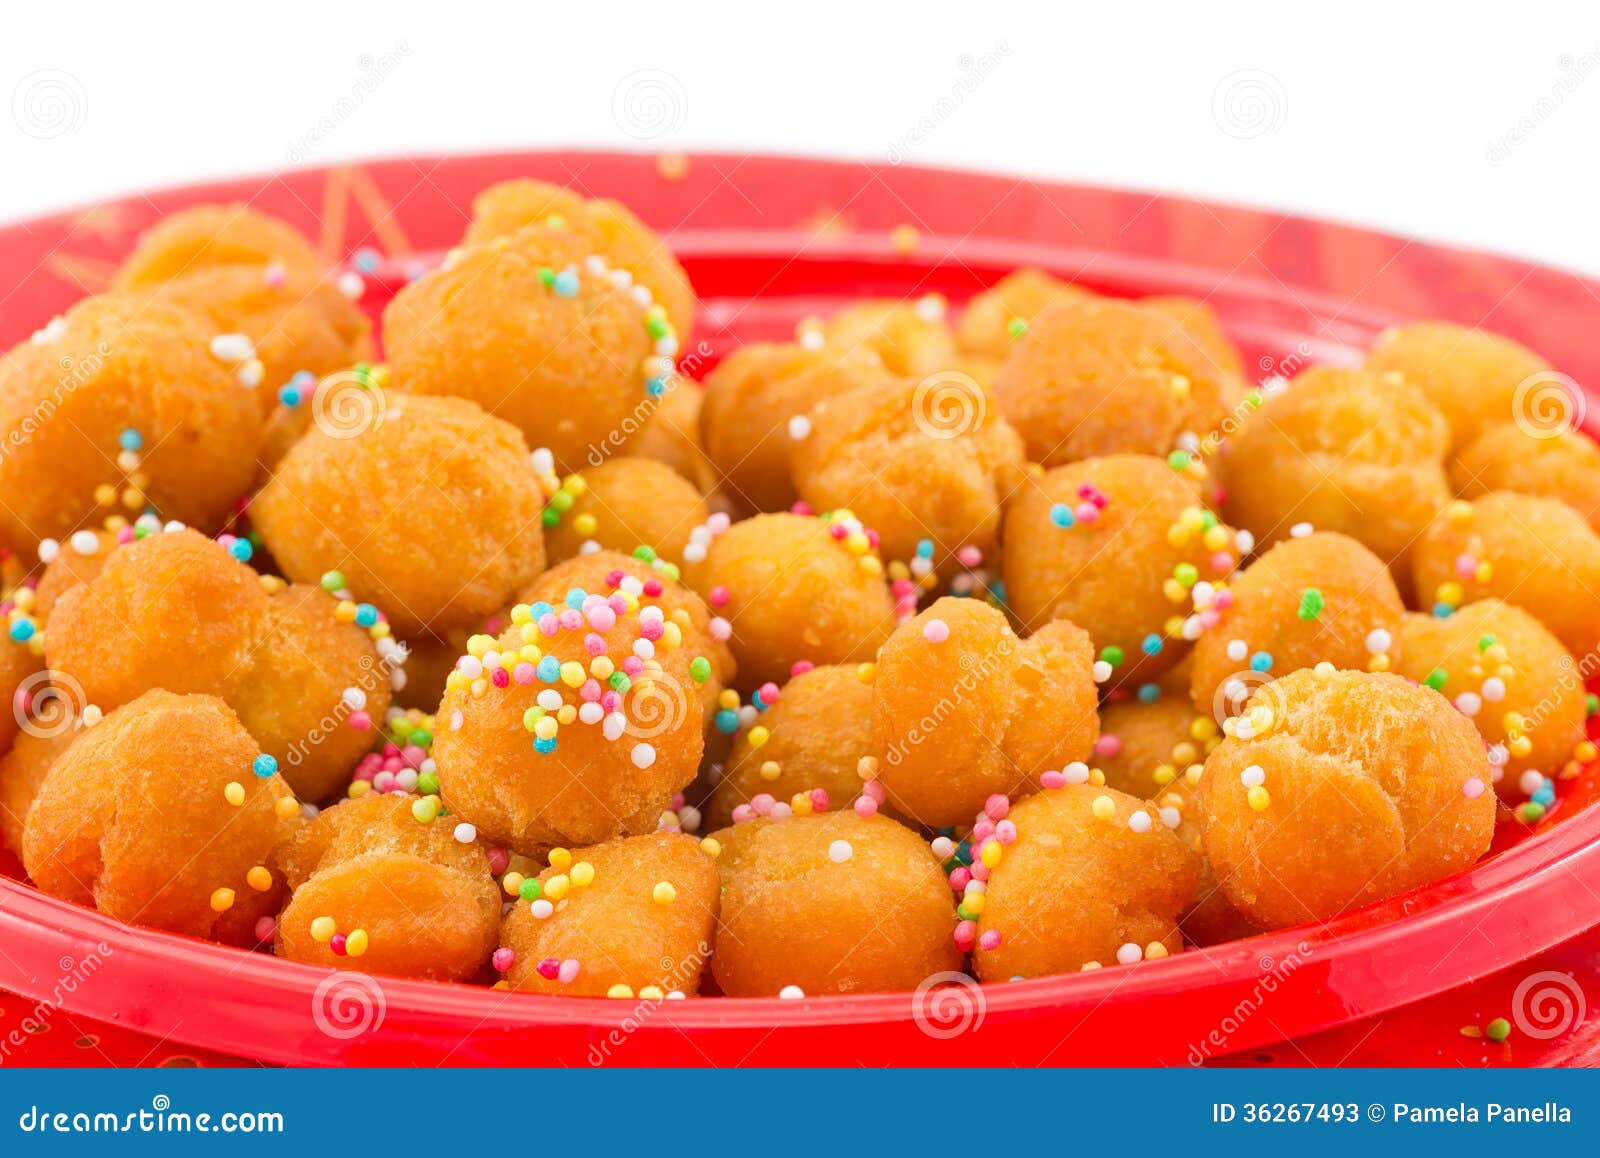 Struffoli stock image. Image of recipe, frosted, diet - 36267493